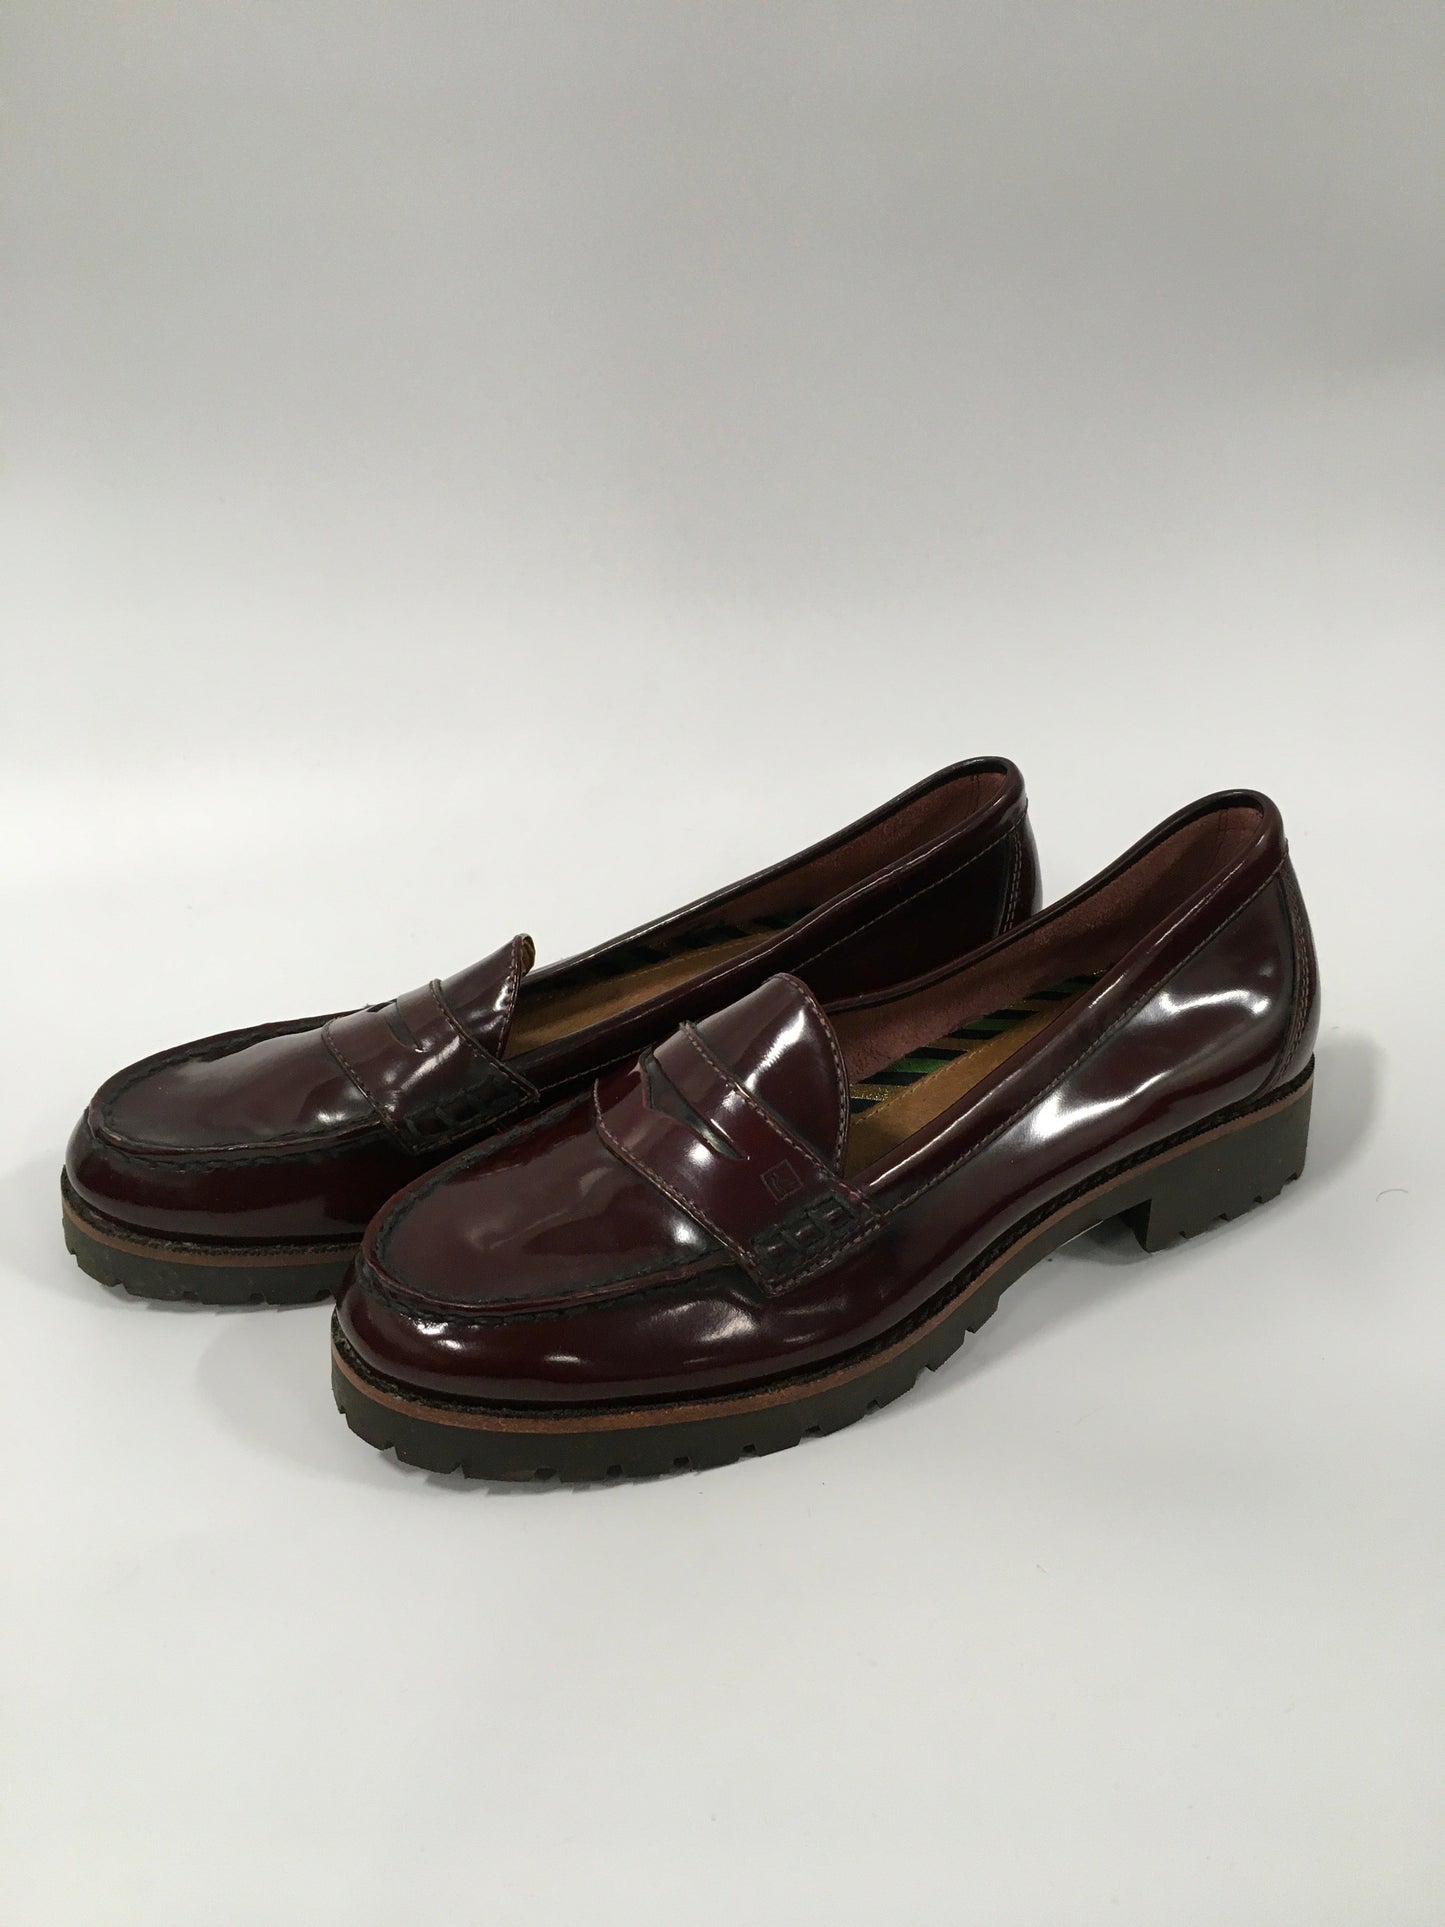 Maroon Shoes Flats Other Sperry, Size 8.5